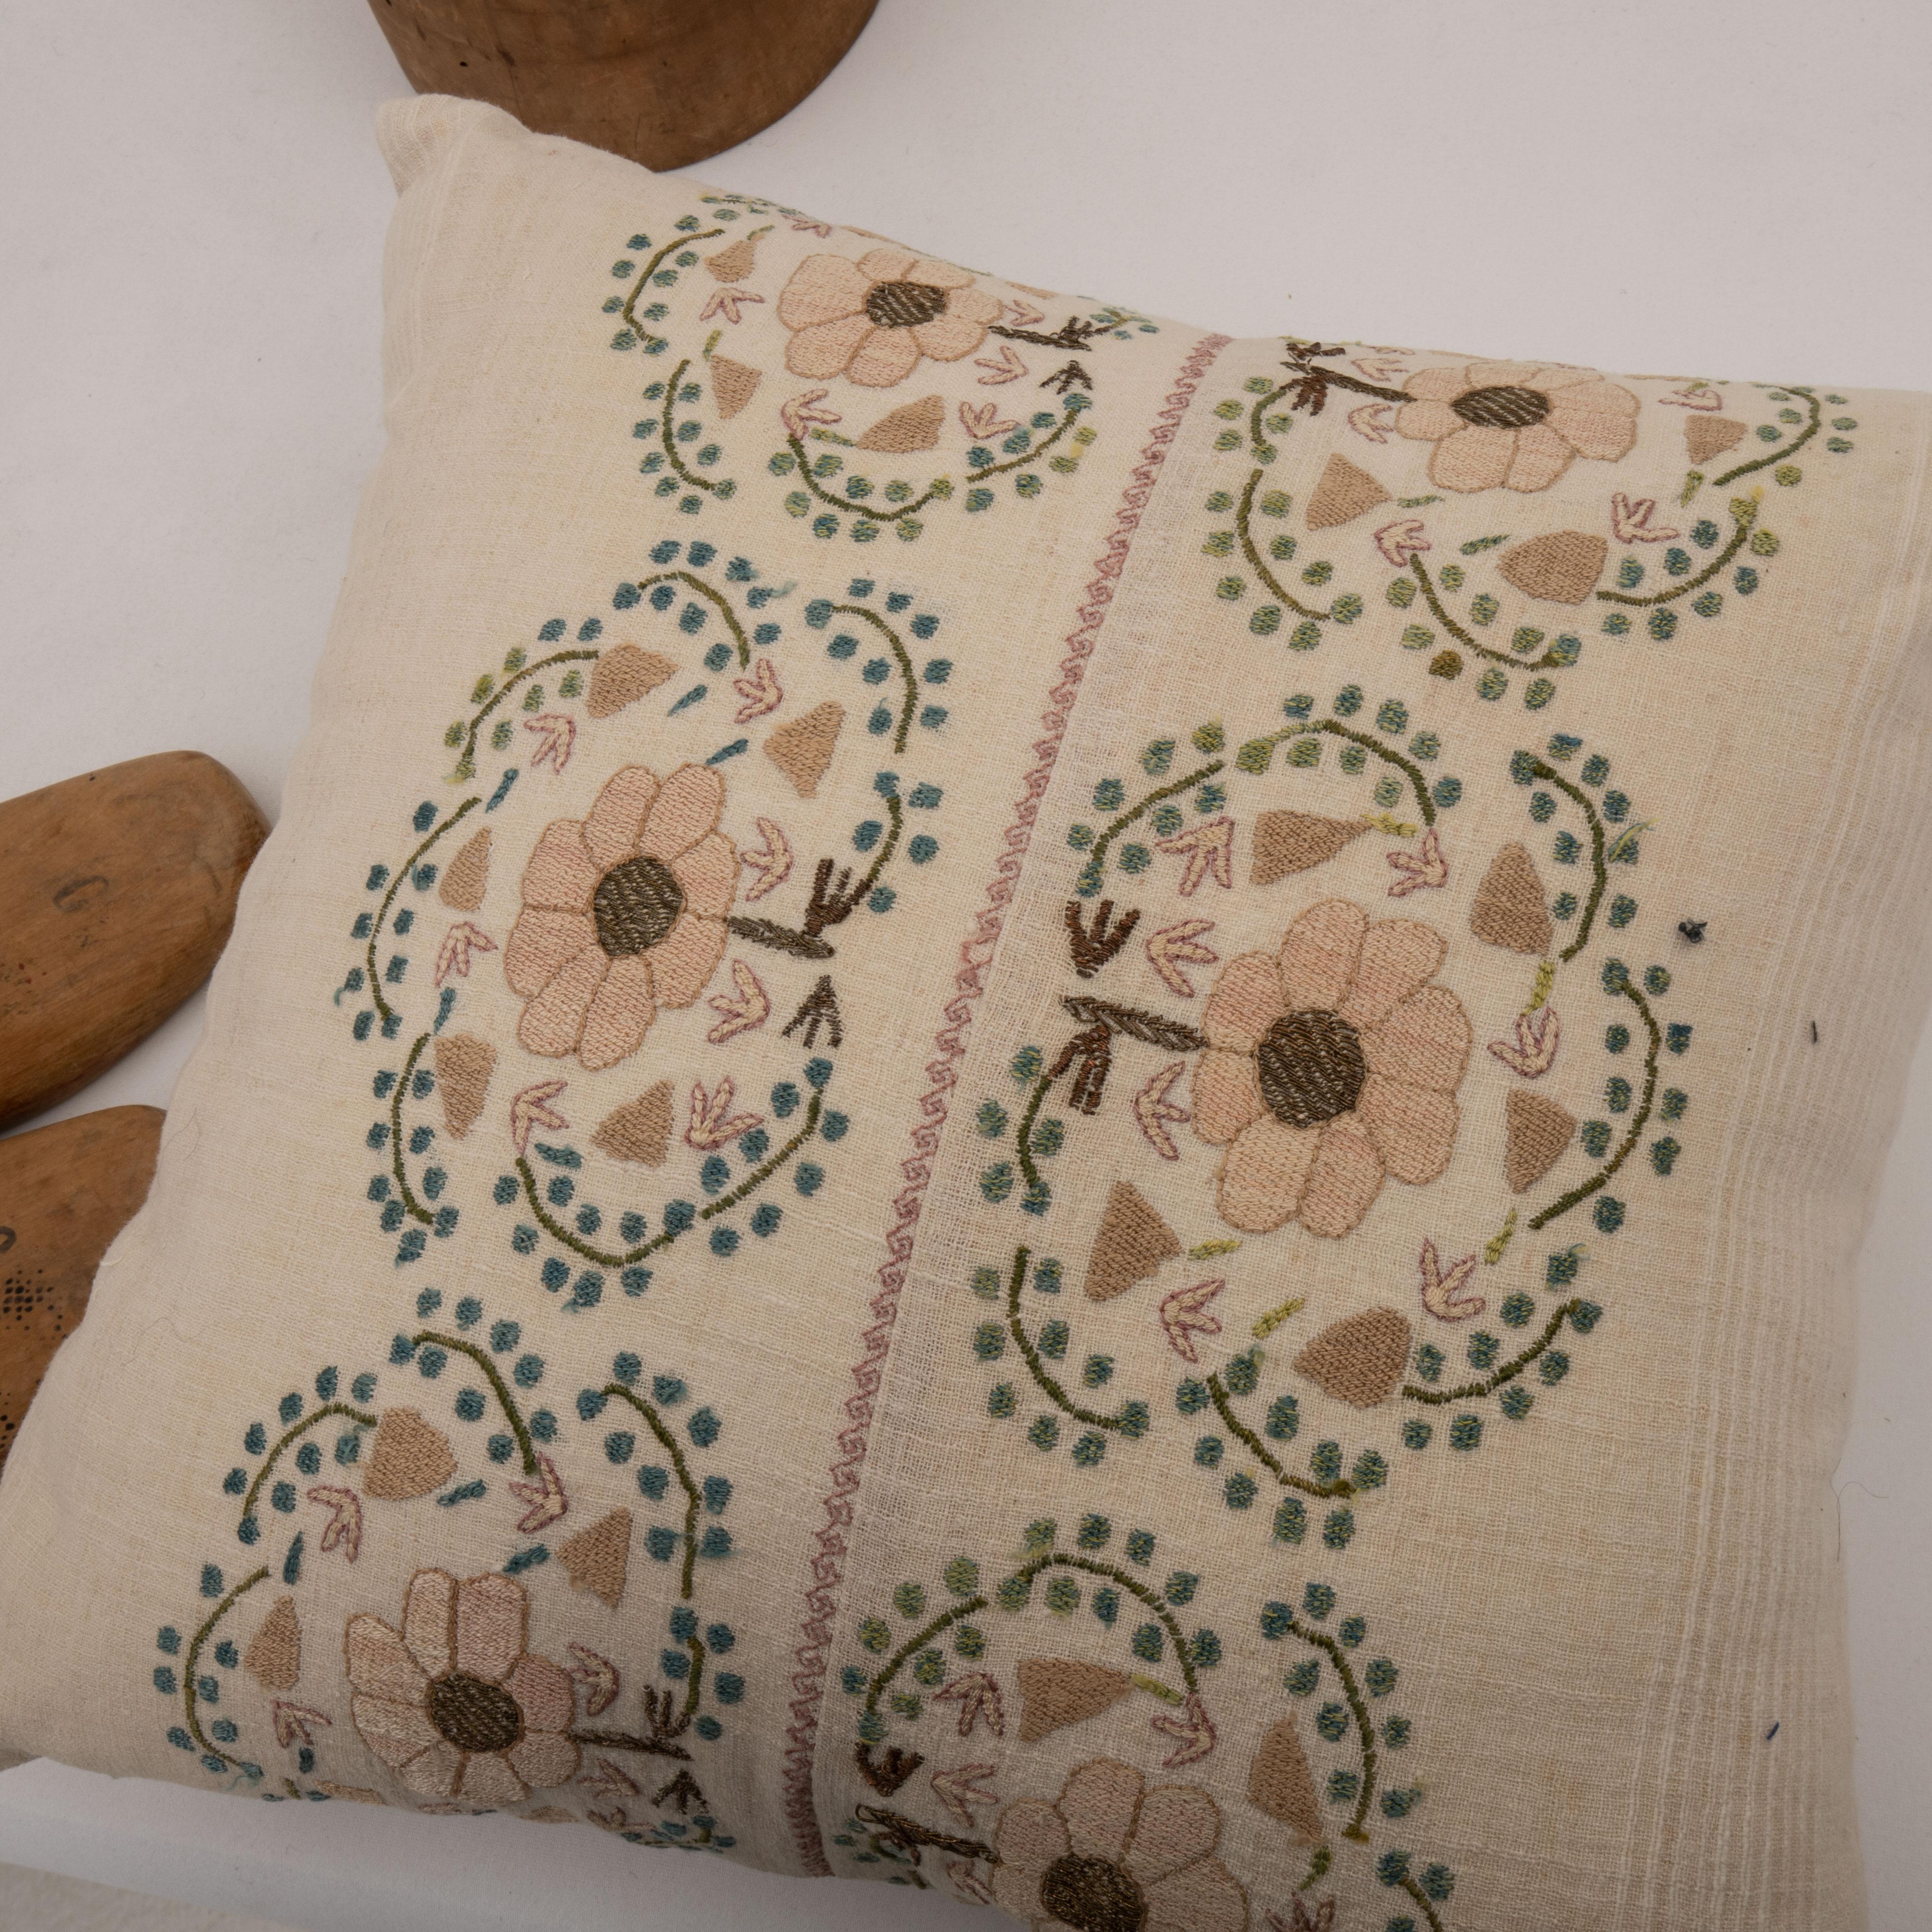 Embroidered Pillow Case Made from an Antique Ottoman Embroidery For Sale